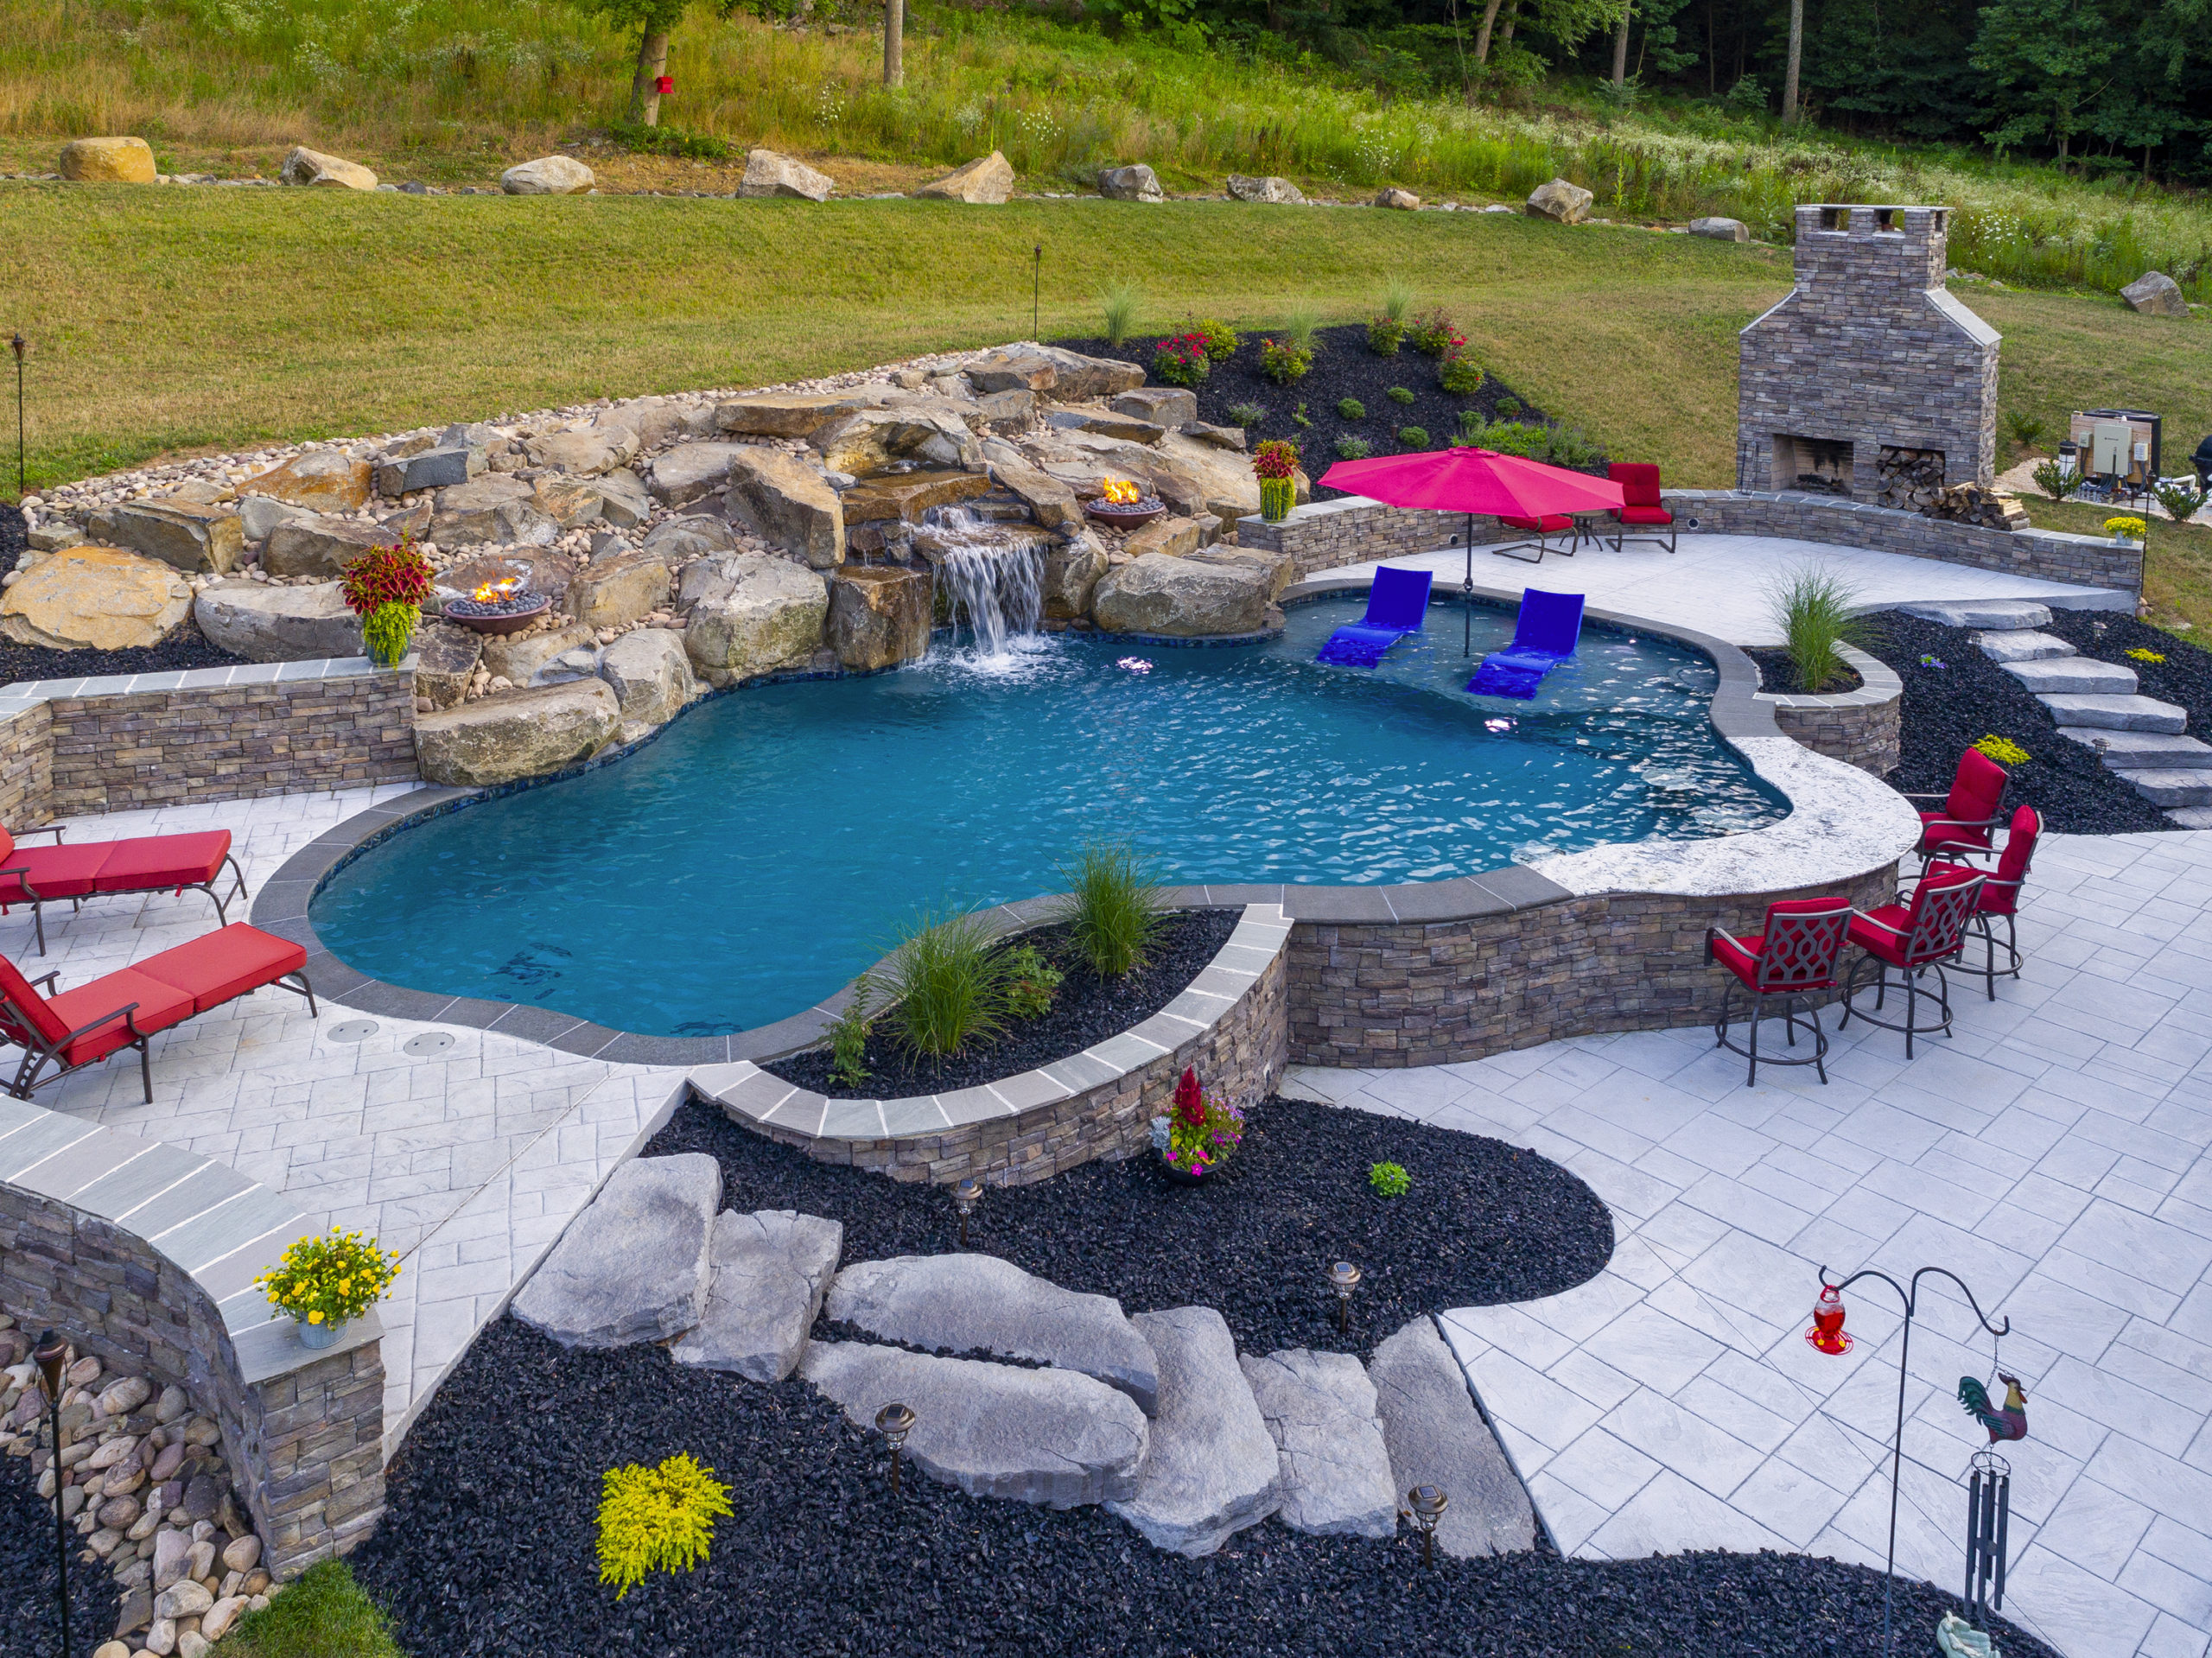 Wavy pool with red chairs and umbrellas